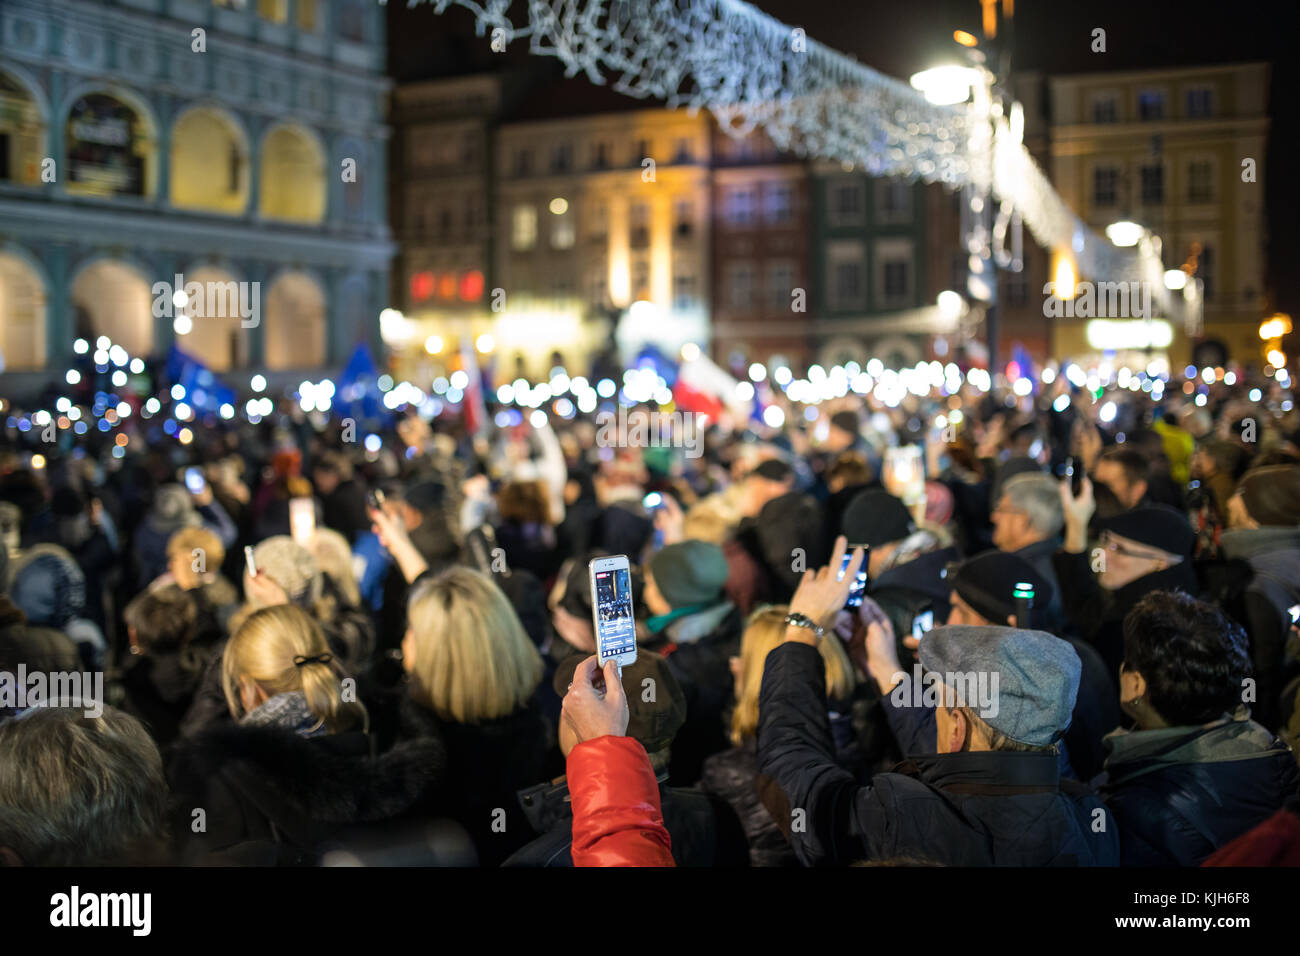 Poland, Poznan, 11.24.2017: Lights for judiciary - protest against violation the constitutional law in Poland, by the conservative party and government. Defending the division of powers. Stock Photo